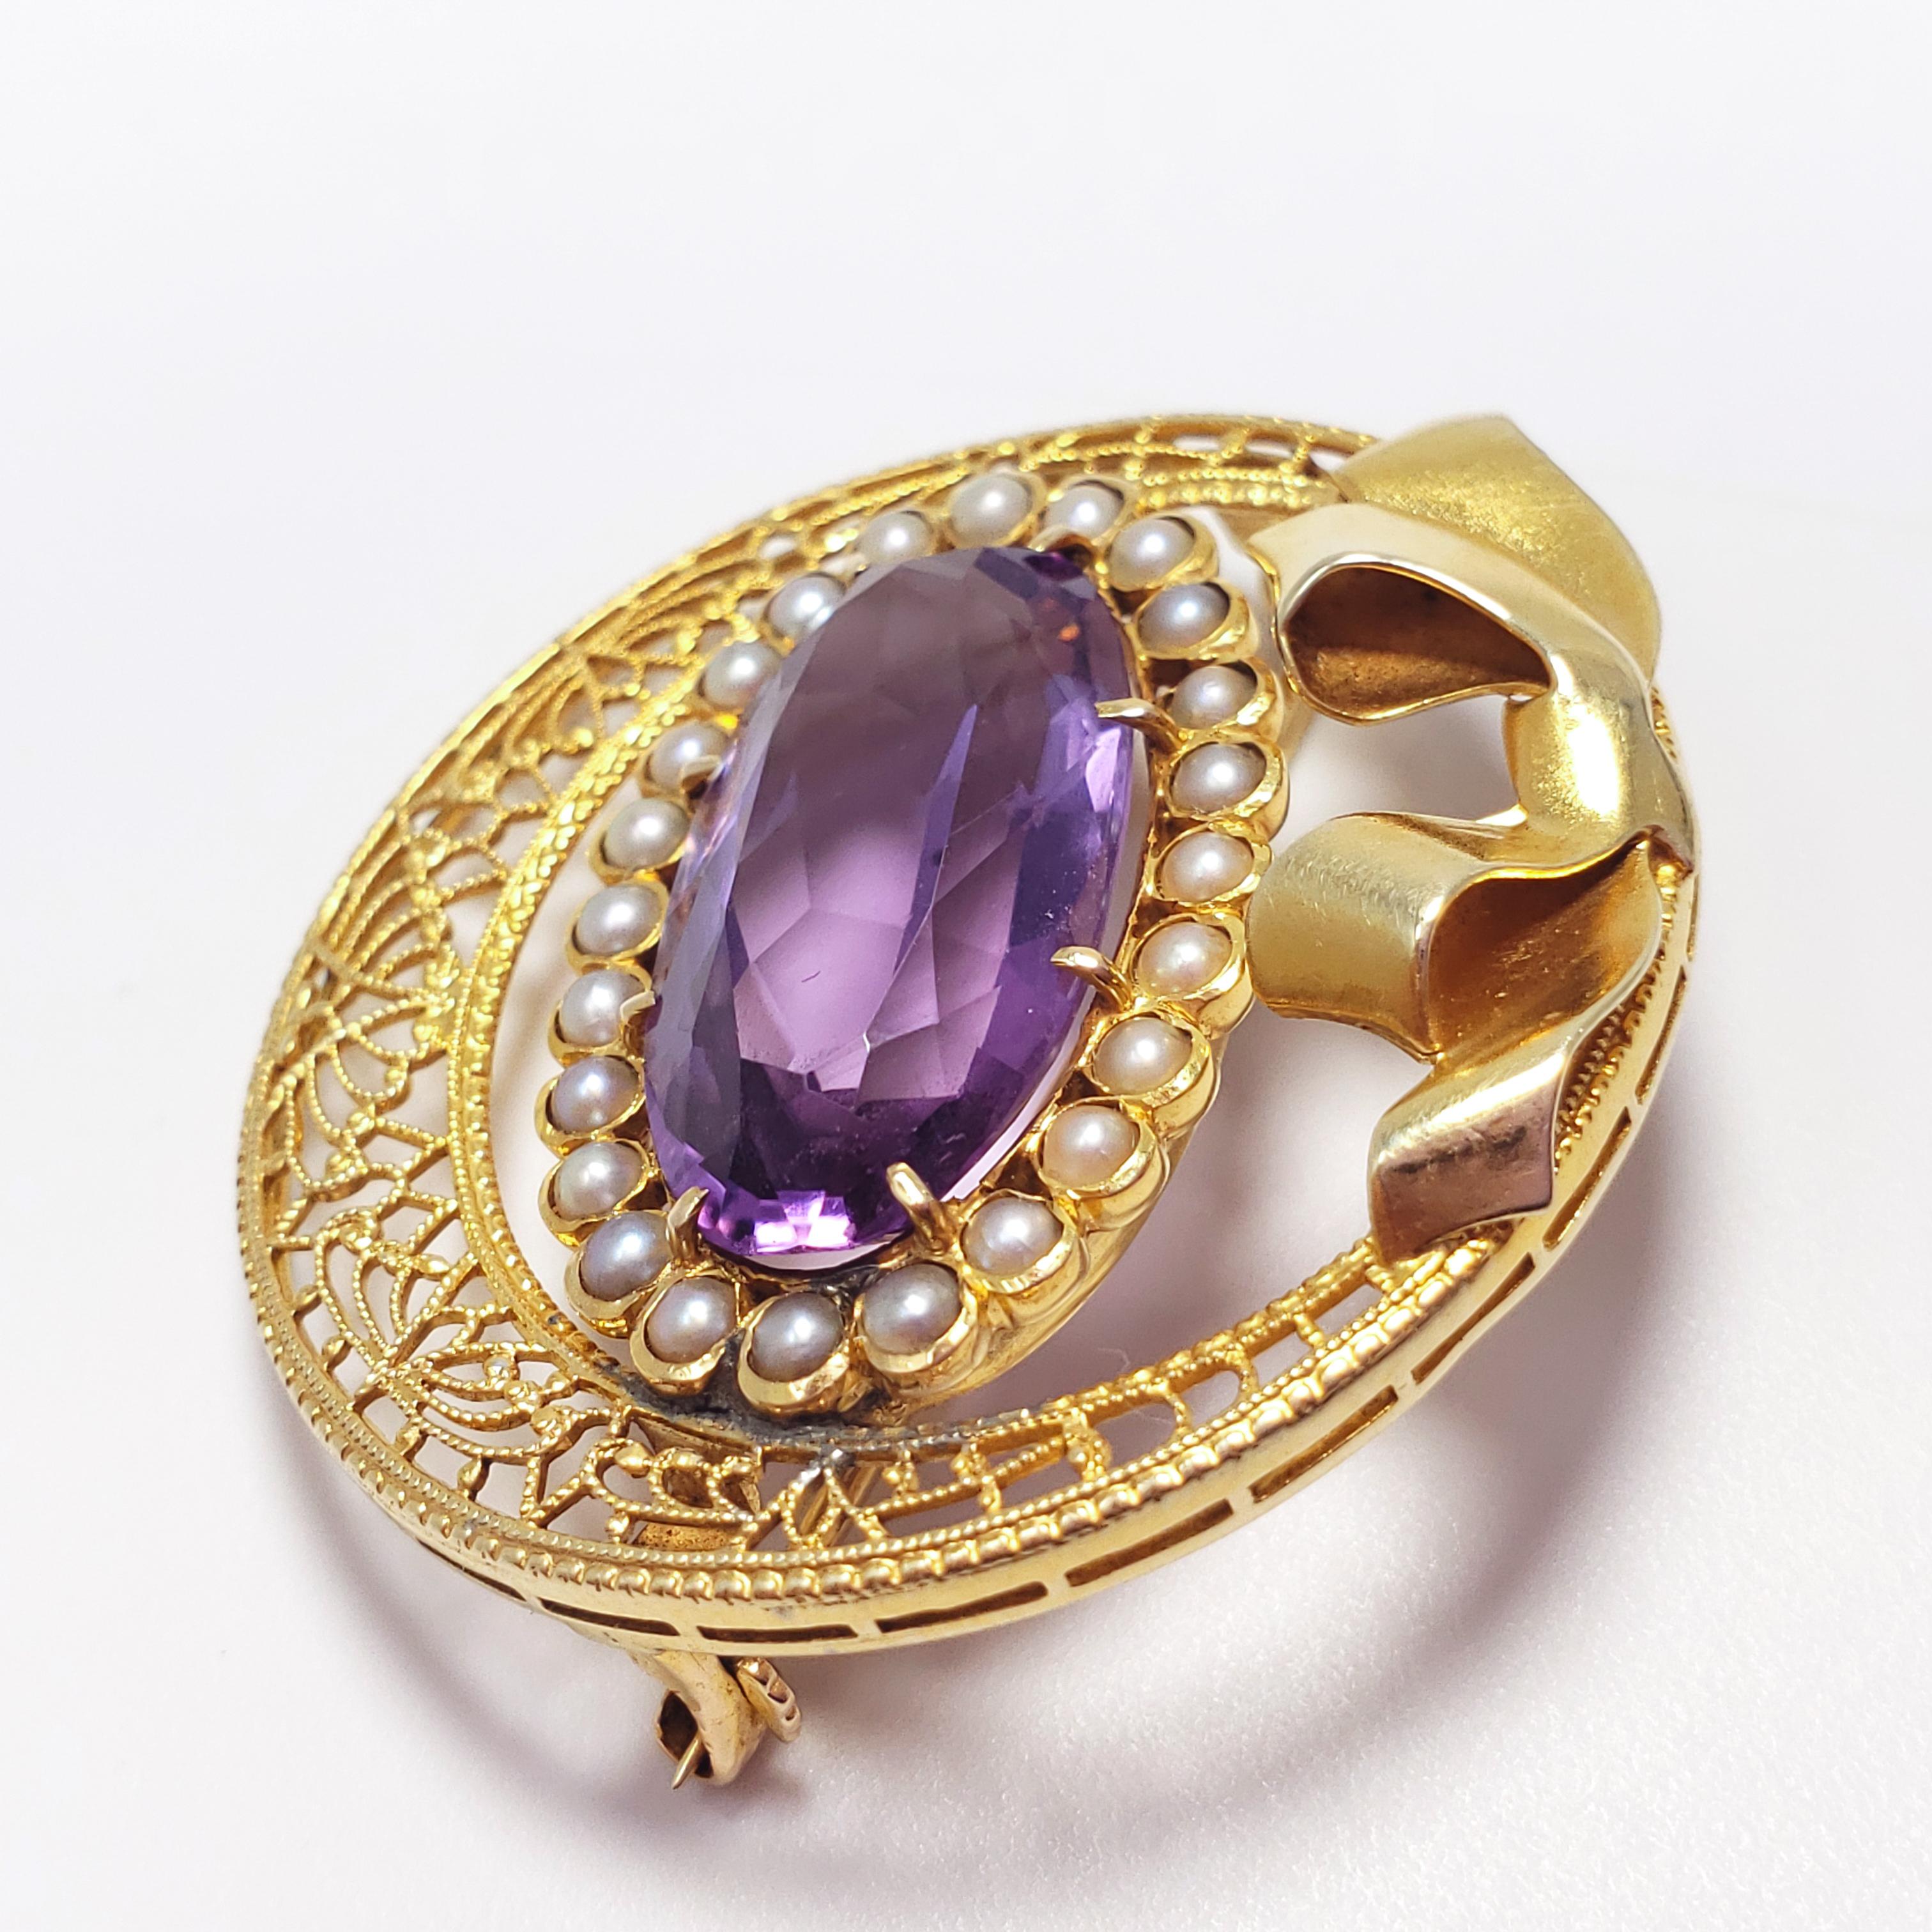 Antique Victorian Natural Amethyst & Seeded Pearl Brooch in 14KT Filigree Gold In Excellent Condition For Sale In Milford, DE